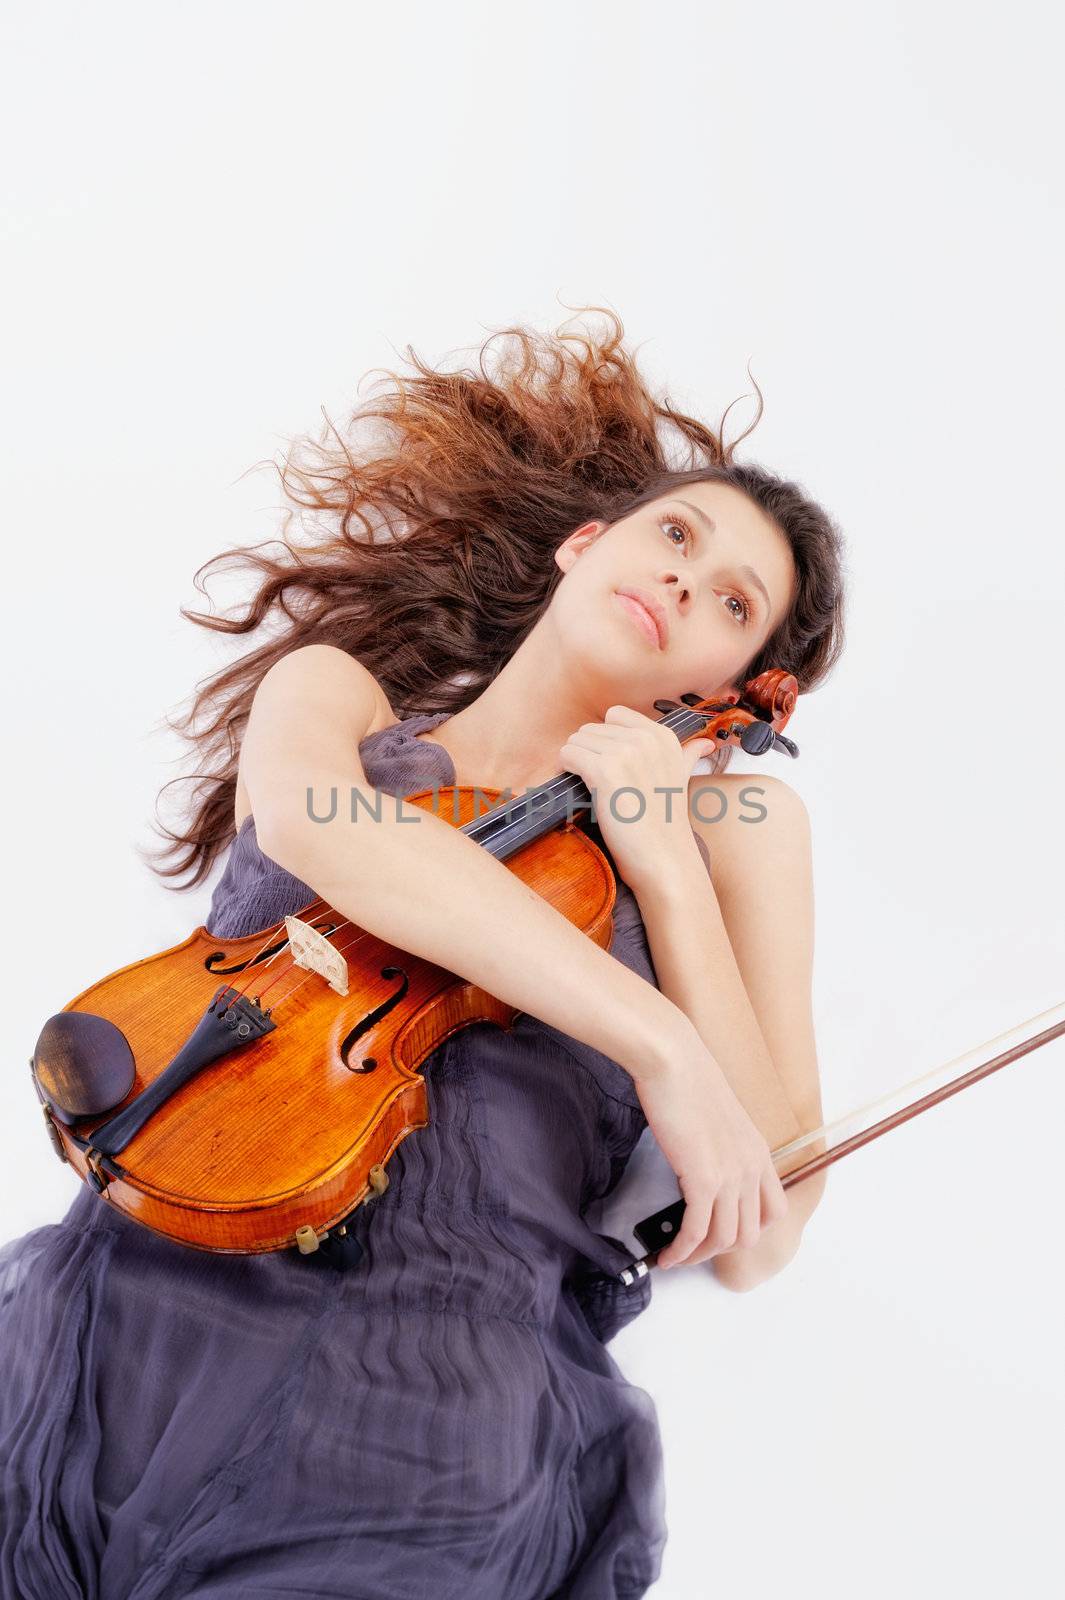 Violin player posing. Isolated over white background